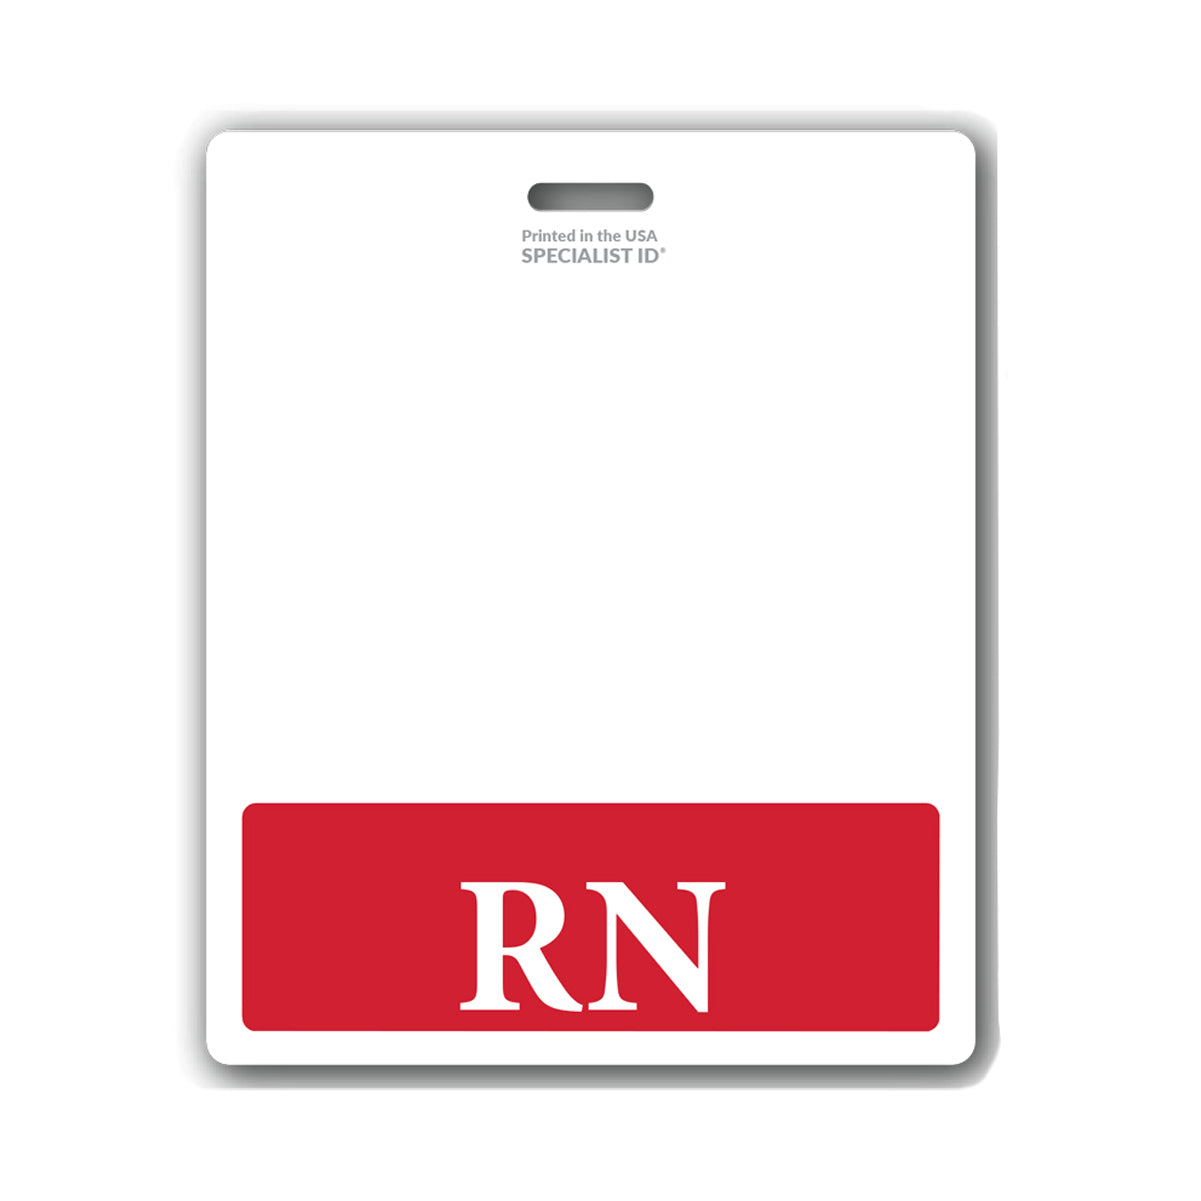 Oversized RN Badge Buddy Horizontal with Red Border - XL ID Badge Backer for Nurses - Double Sided Print